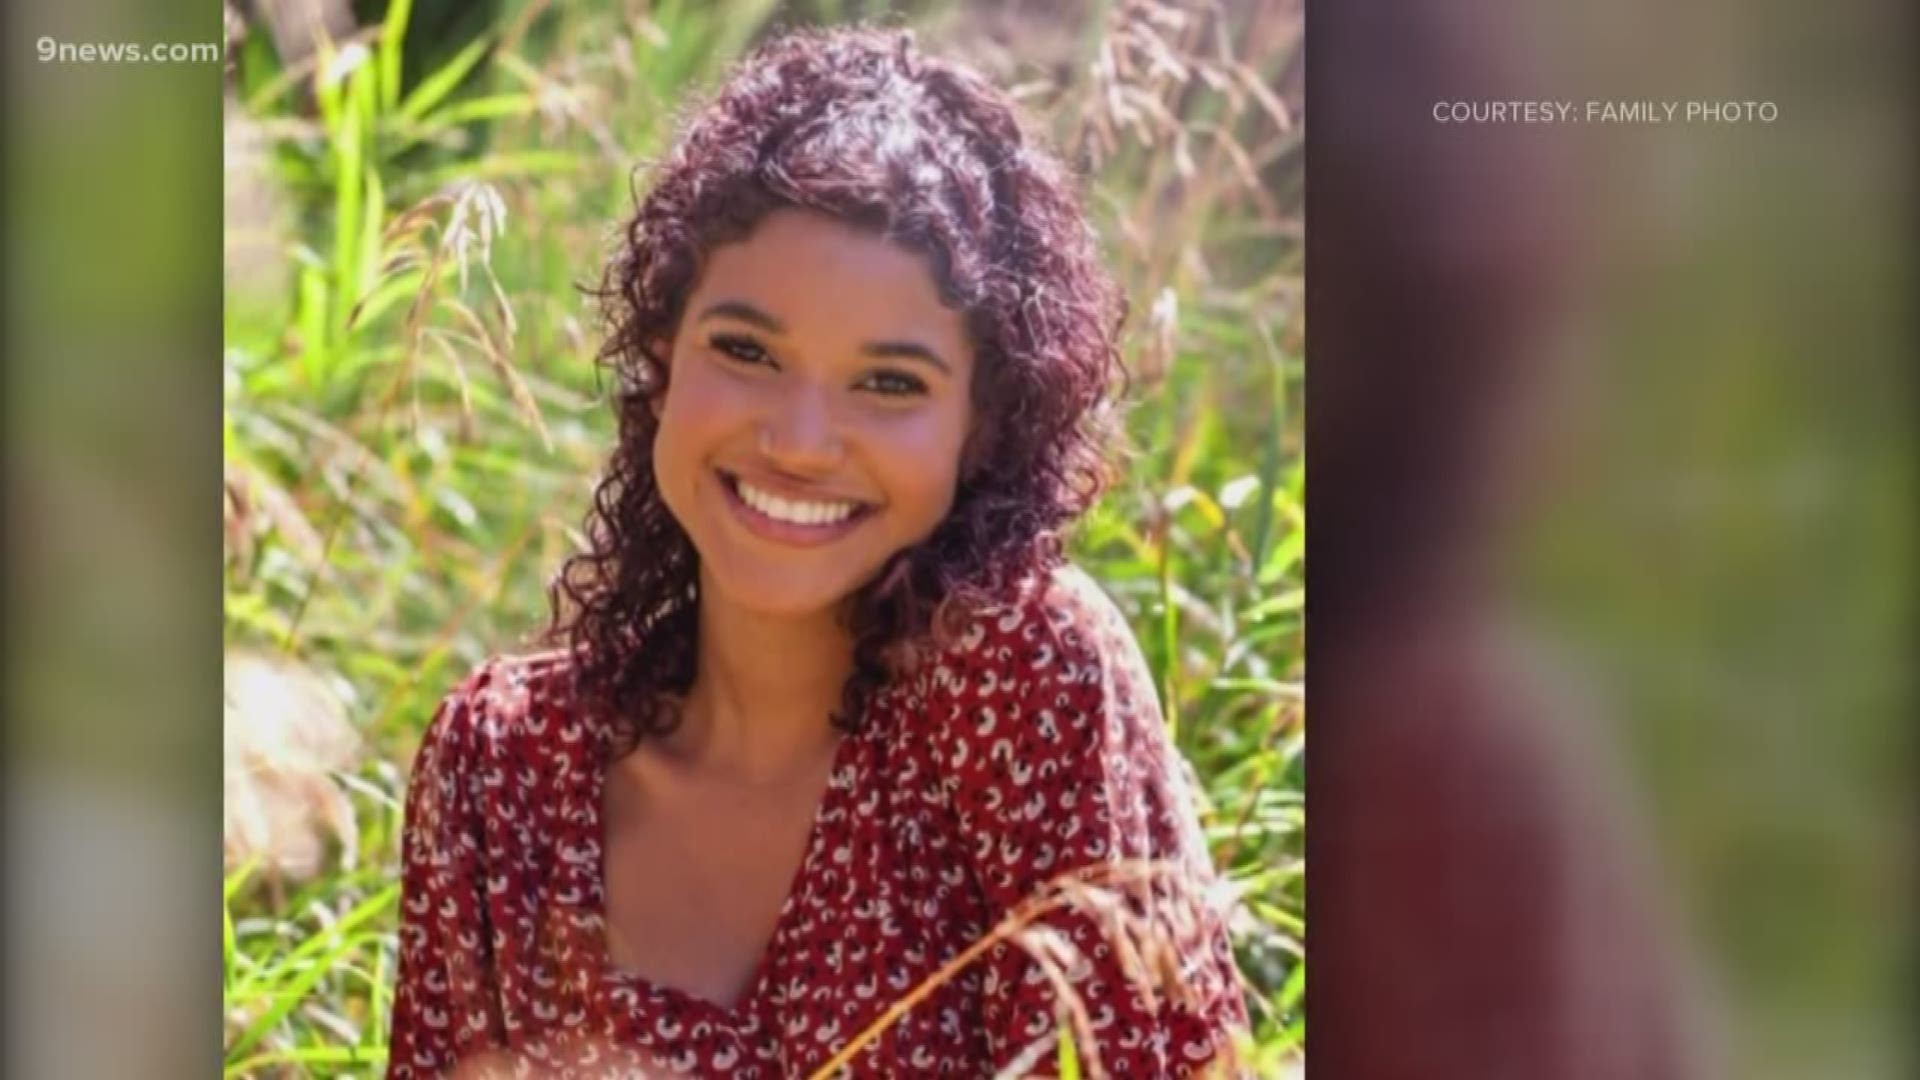 The mother and big sister of a Mile High Academy student killed in a suspected murder-suicide this month spoke publicly Friday about their loss.